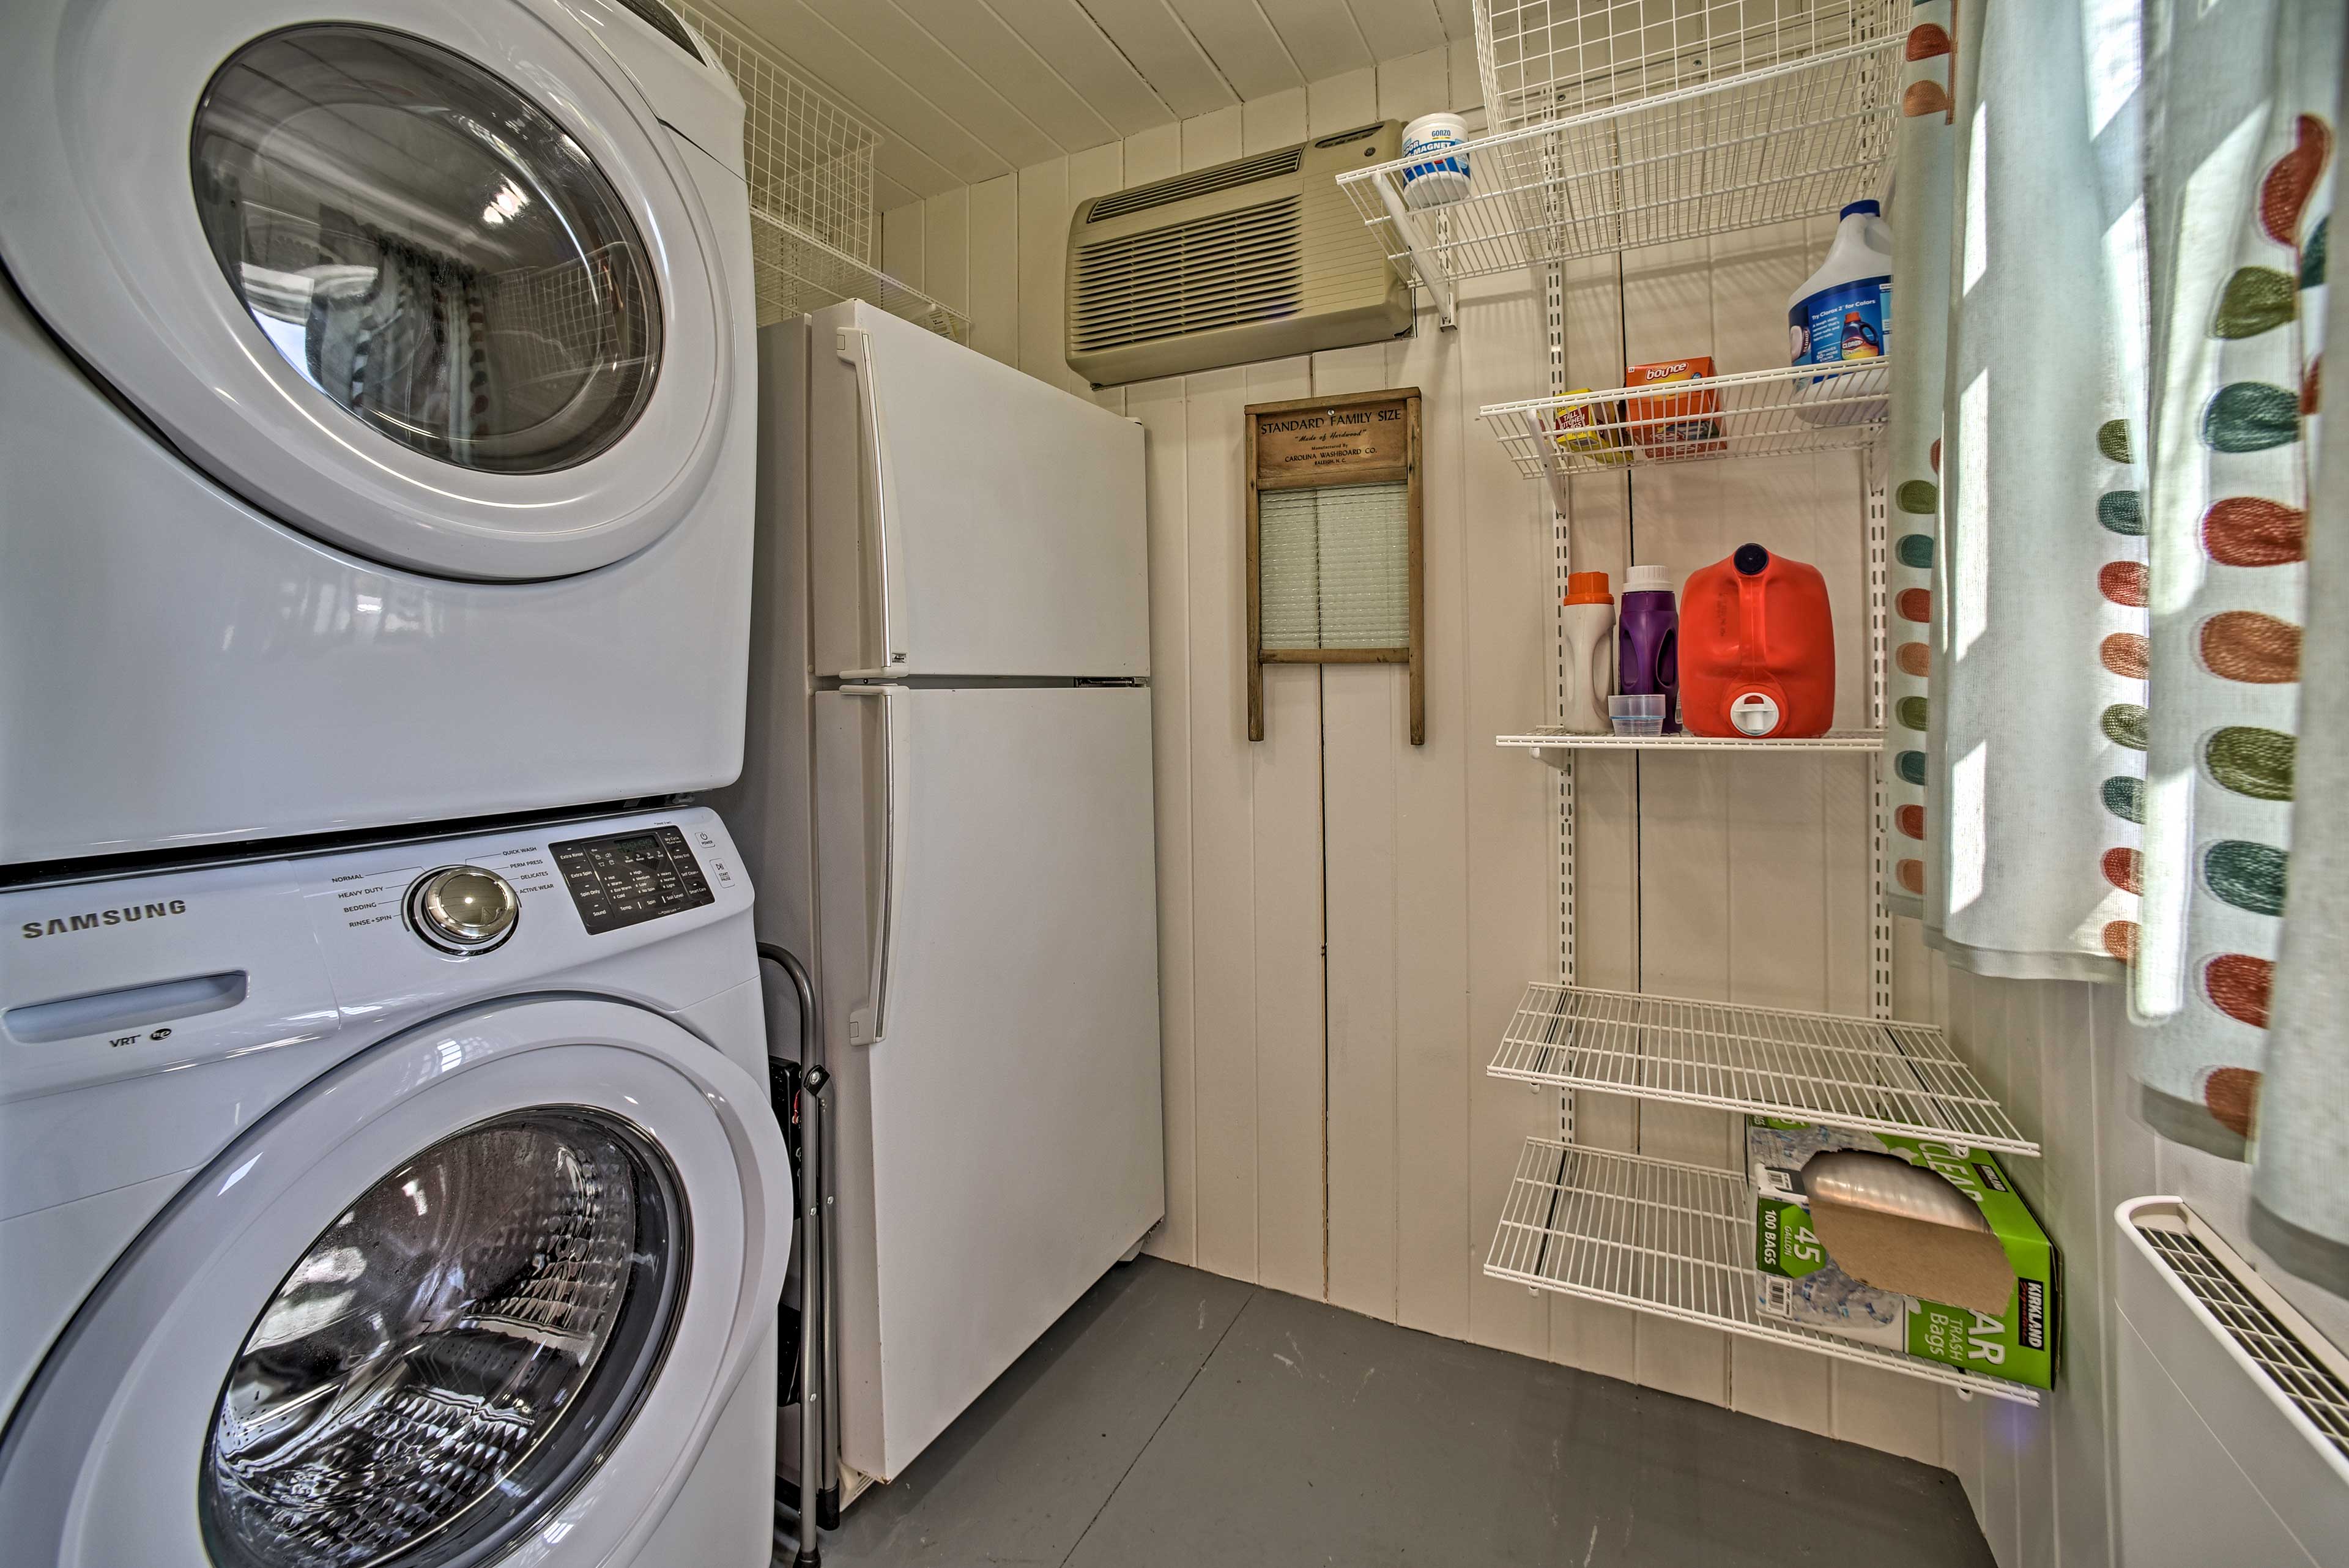 Laundry Room | Detergent Provided